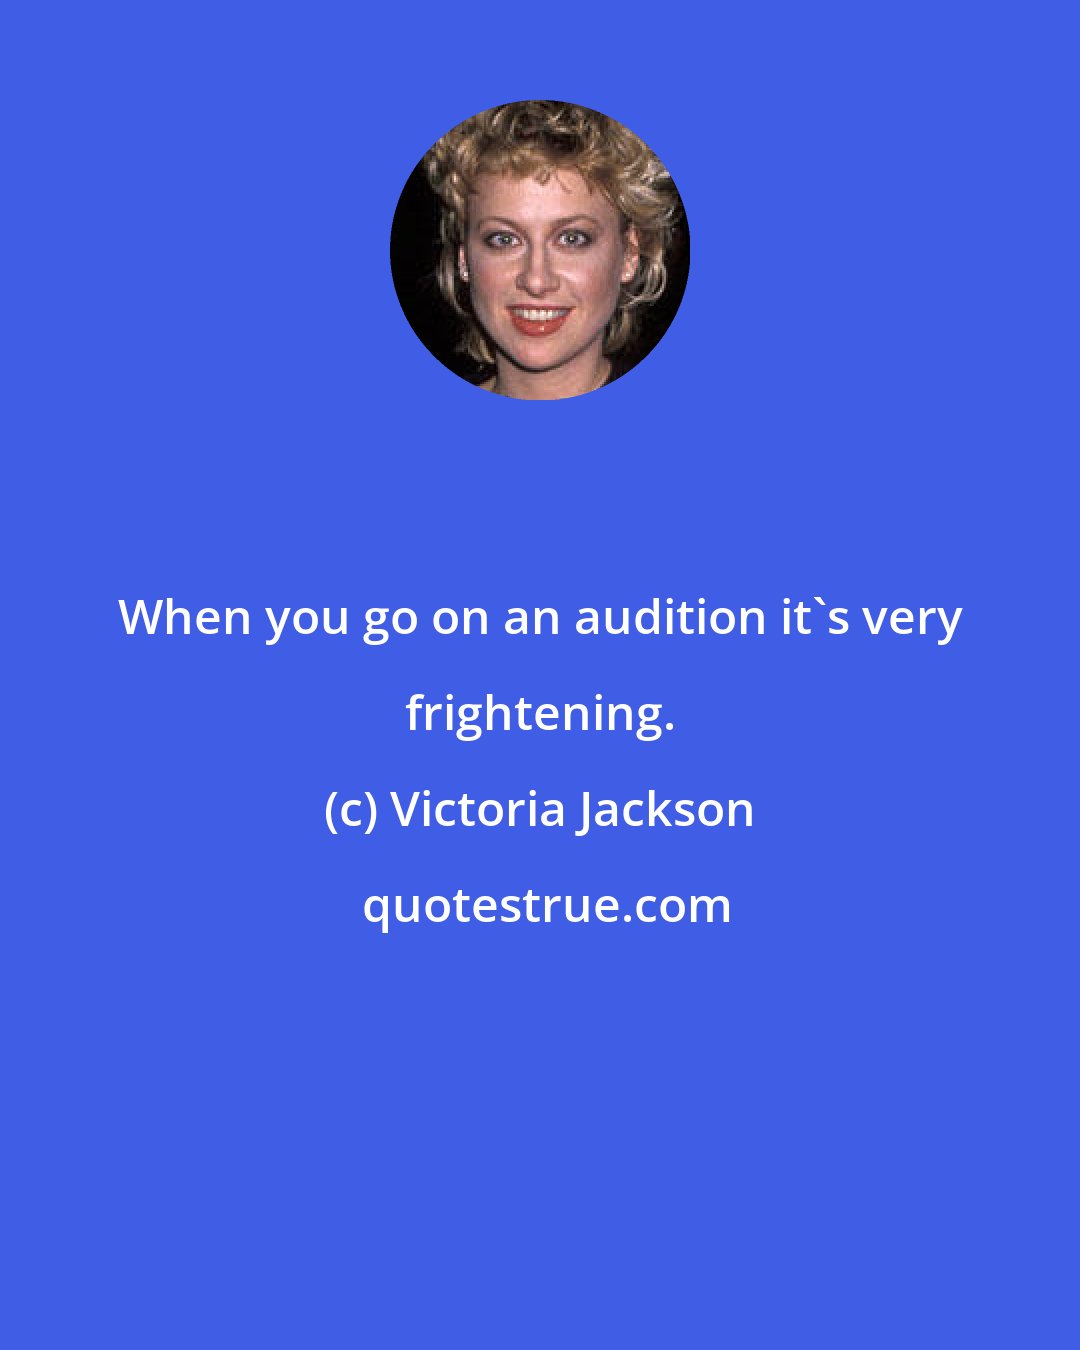 Victoria Jackson: When you go on an audition it's very frightening.